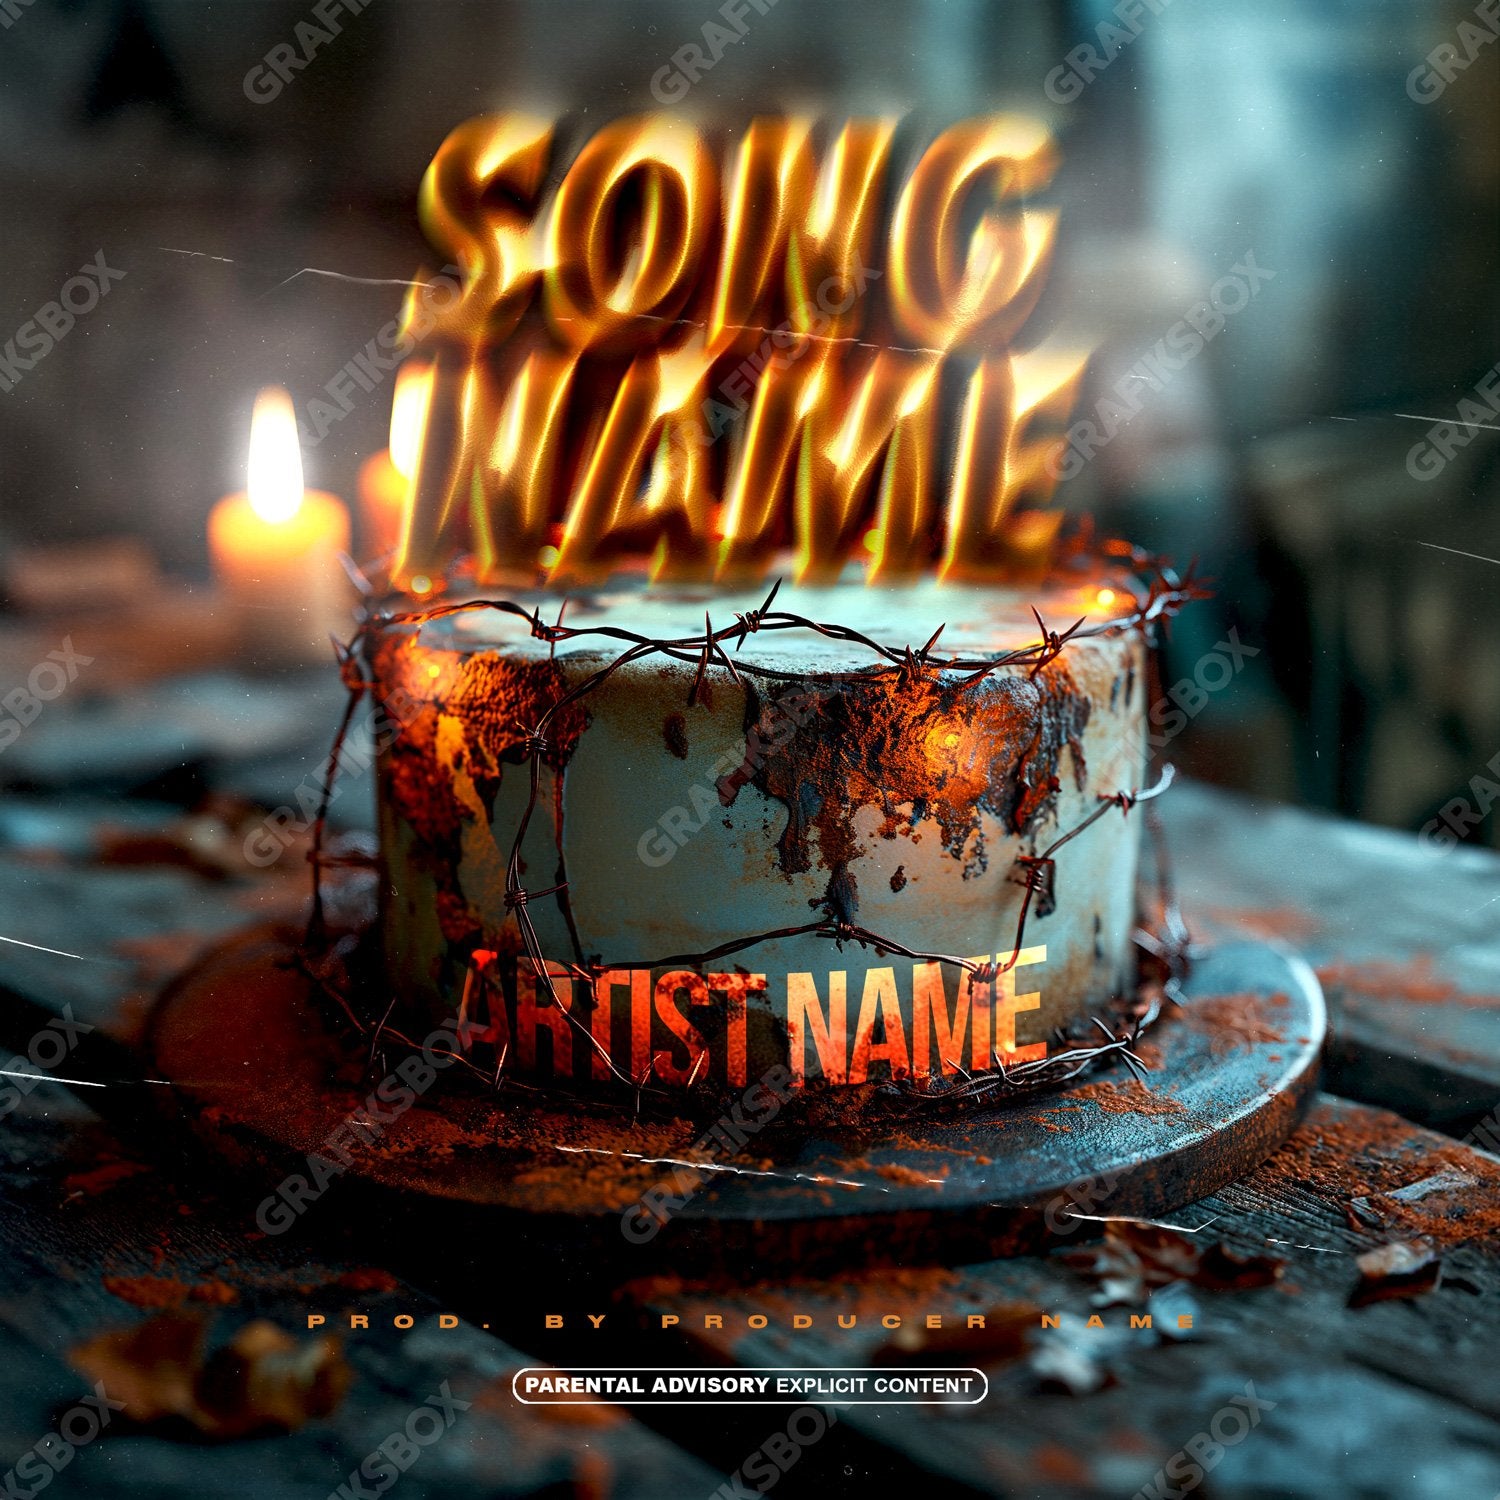 Barbed Cake premade cover art